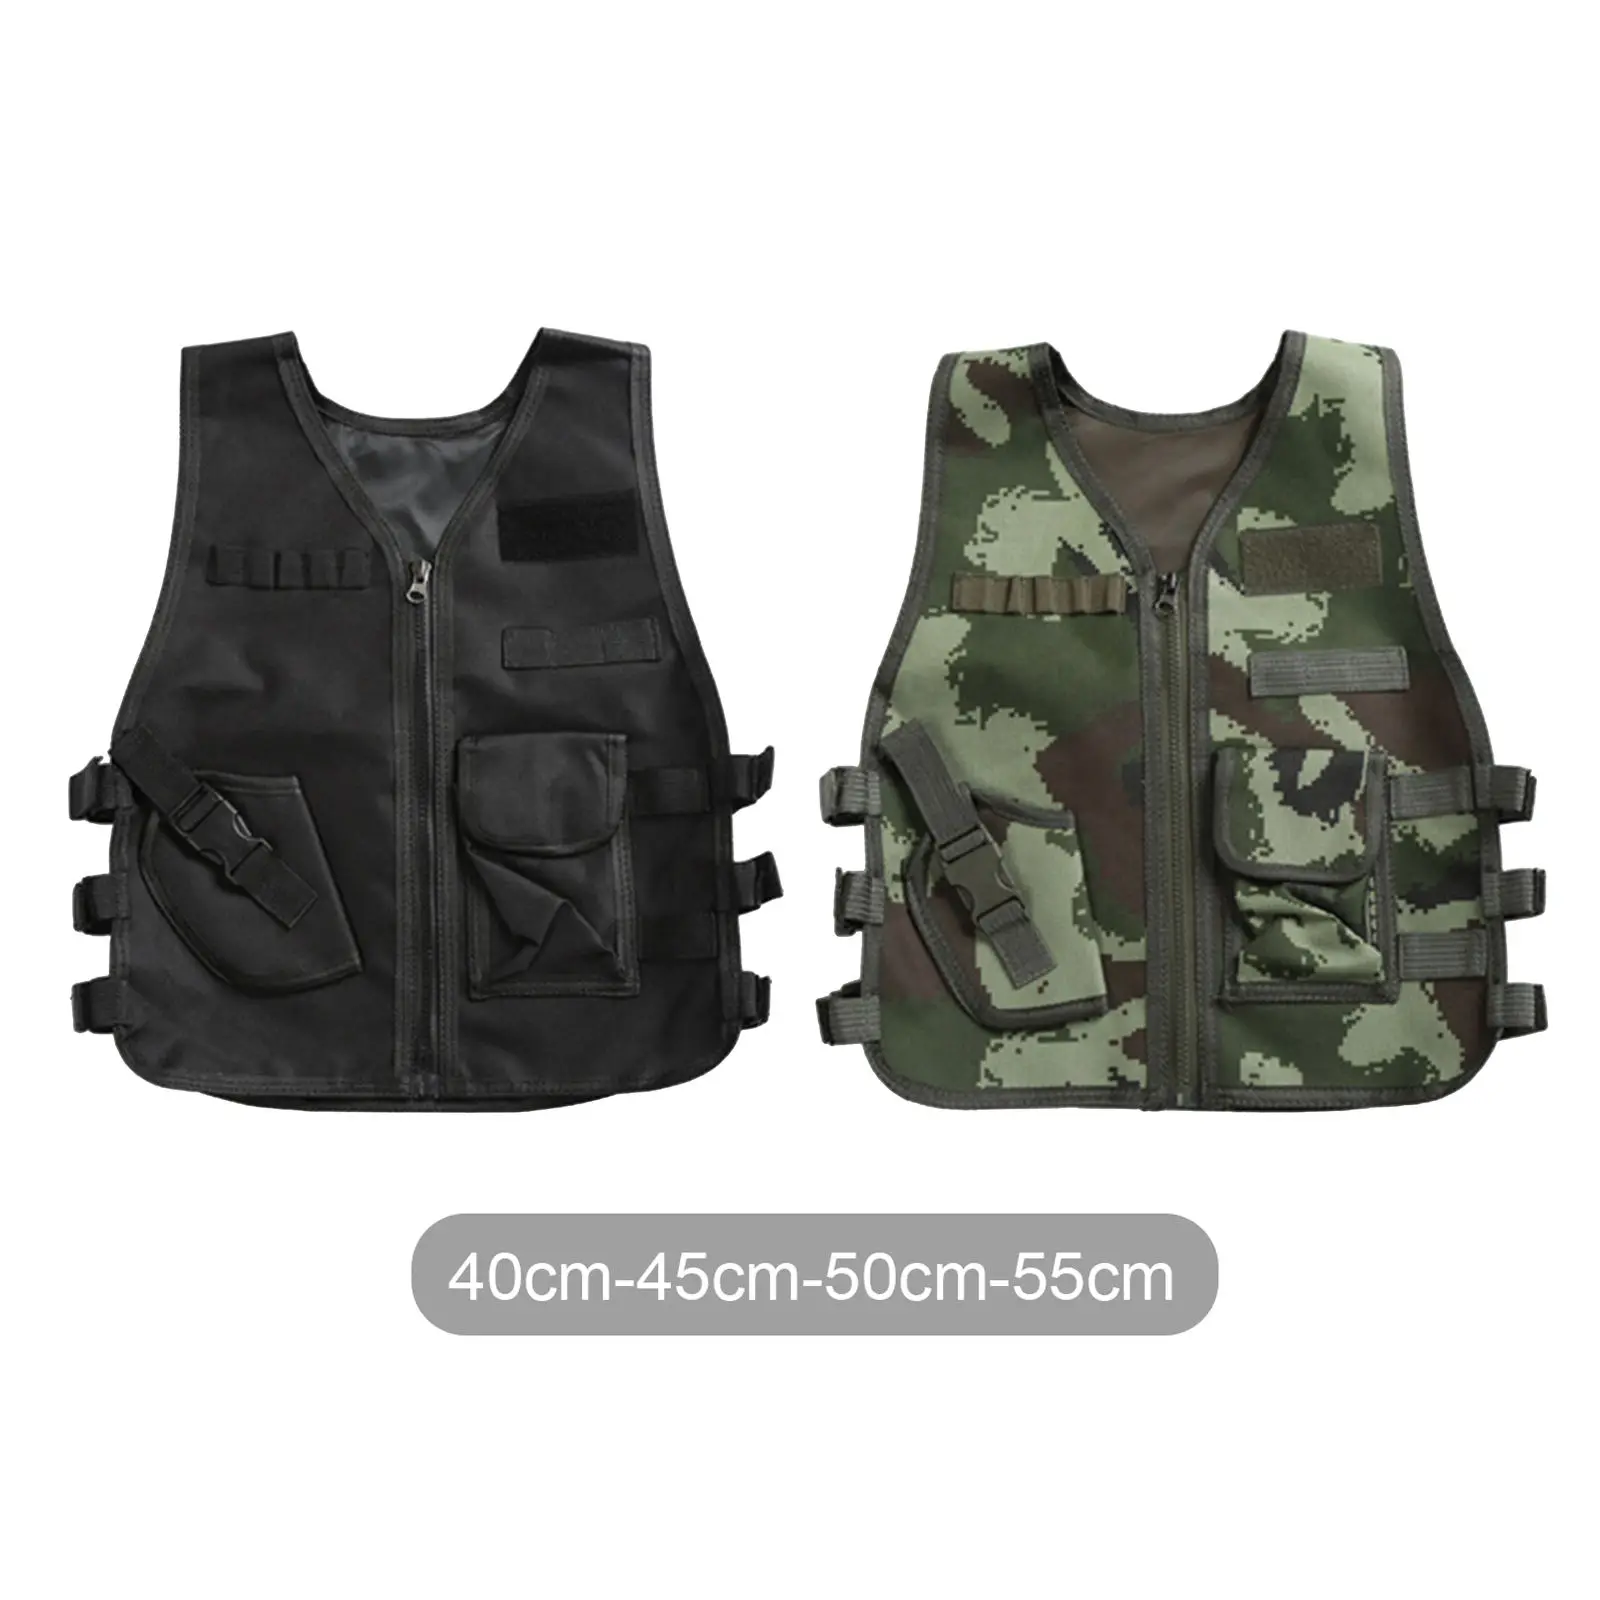 

Kid Military Tactical Vest Police Gaming Training Waistcoat Assault Gear Plate Carrier Holder Outdoor Camping Body Protector